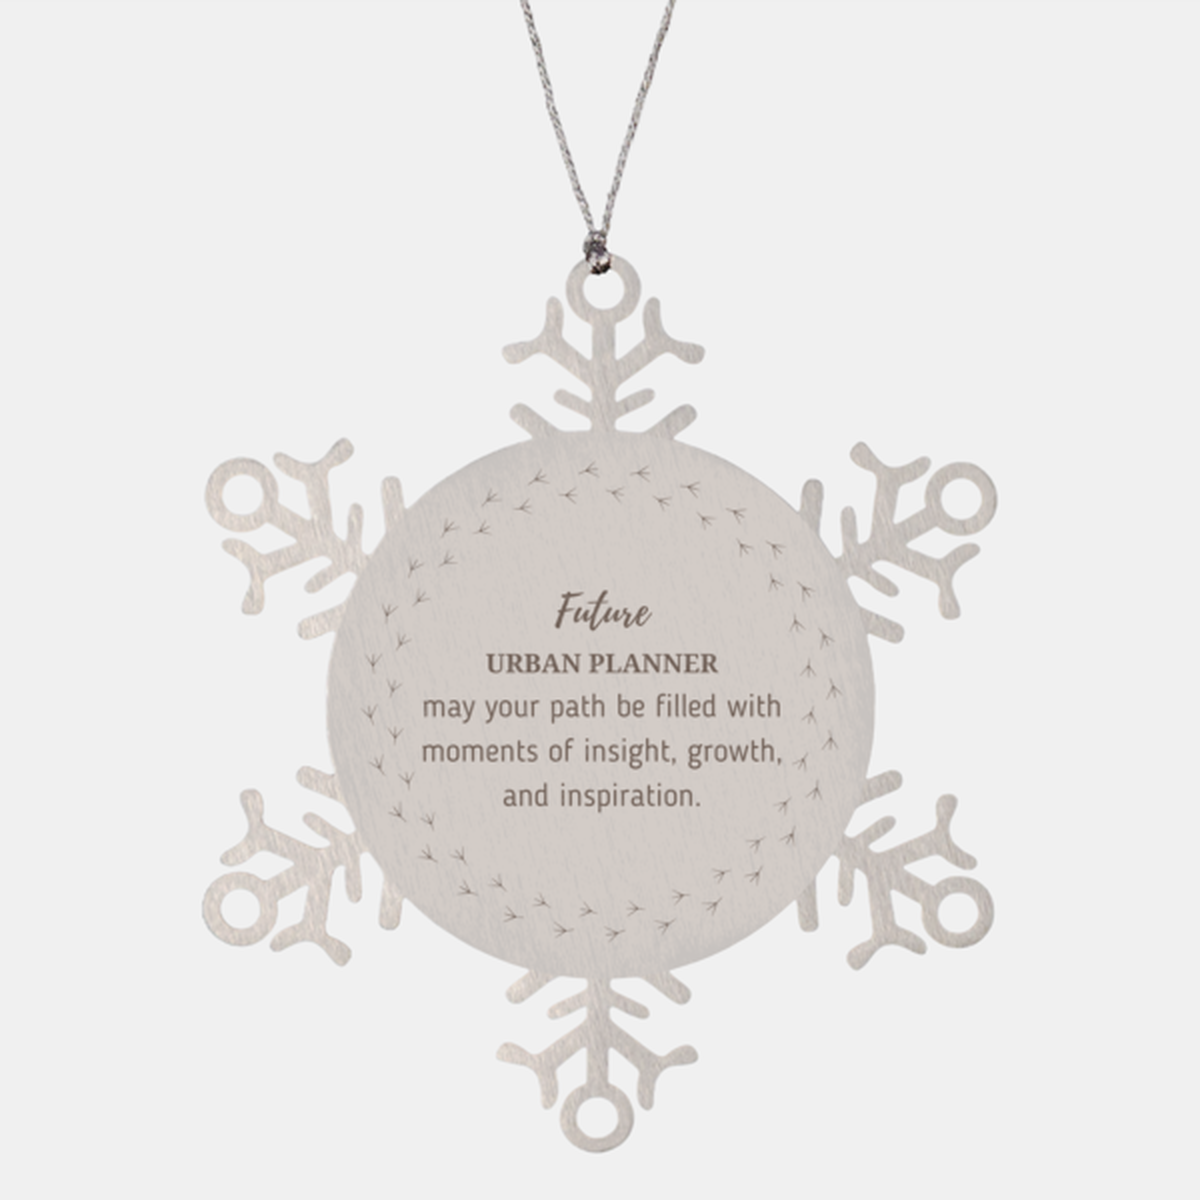 Future Urban Planner Gifts, May your path be filled with moments of insight, Graduation Gifts for New Urban Planner, Christmas Unique Snowflake Ornament For Men, Women, Friends